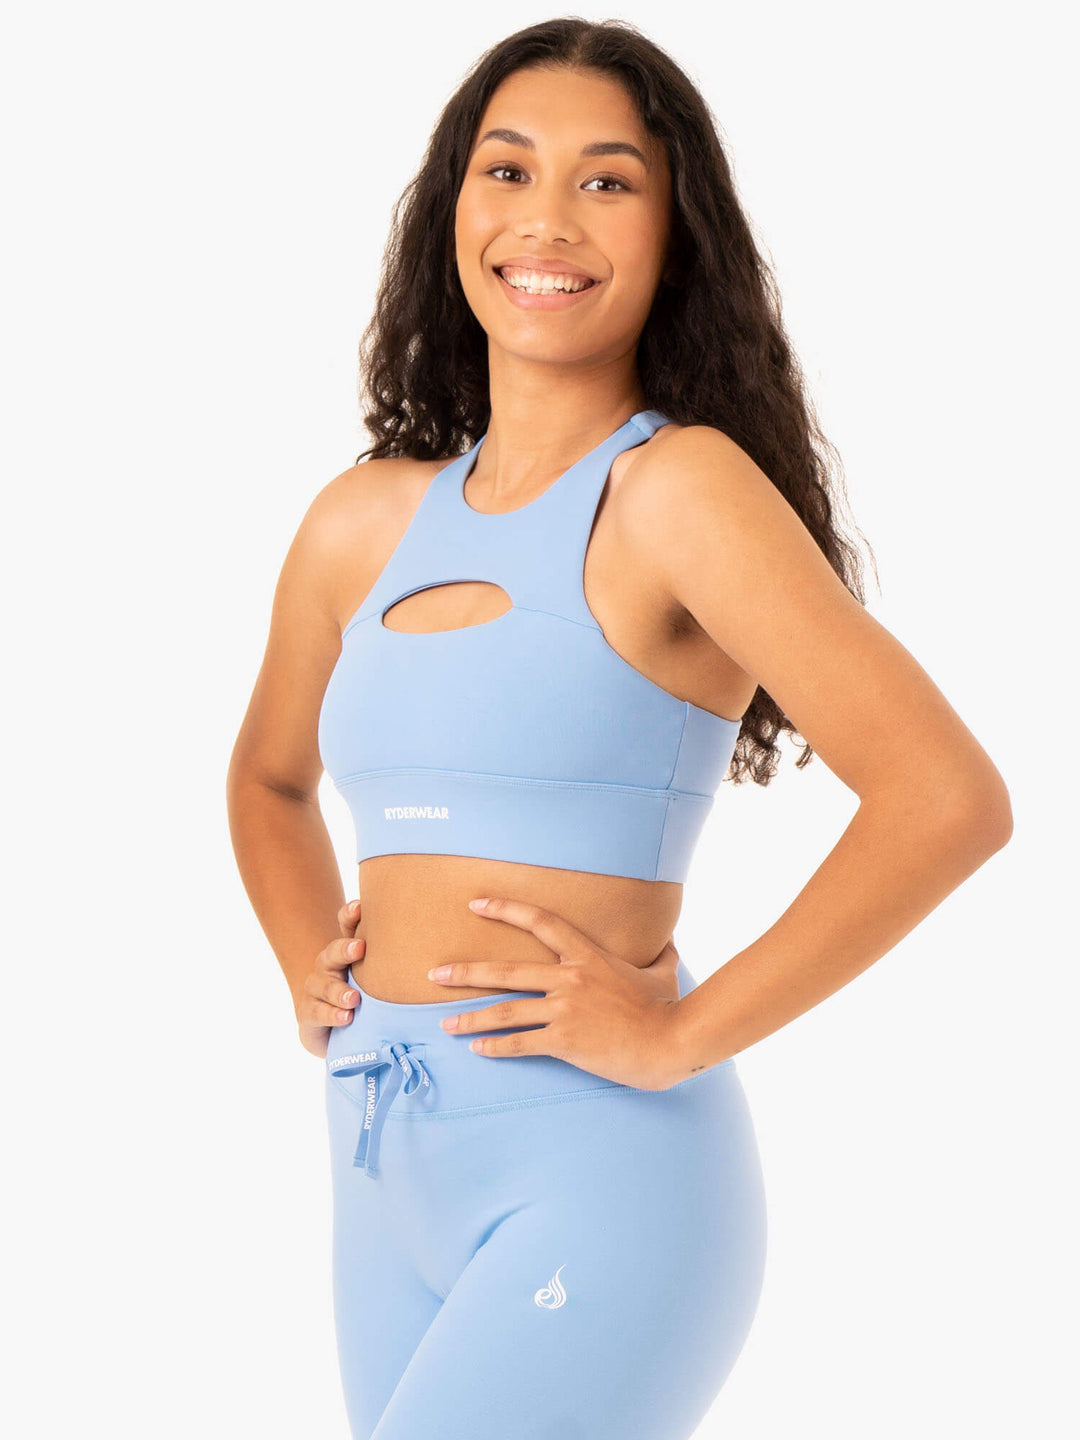 Replay Cut Out Sports Bra - Sky Blue Clothing Ryderwear 